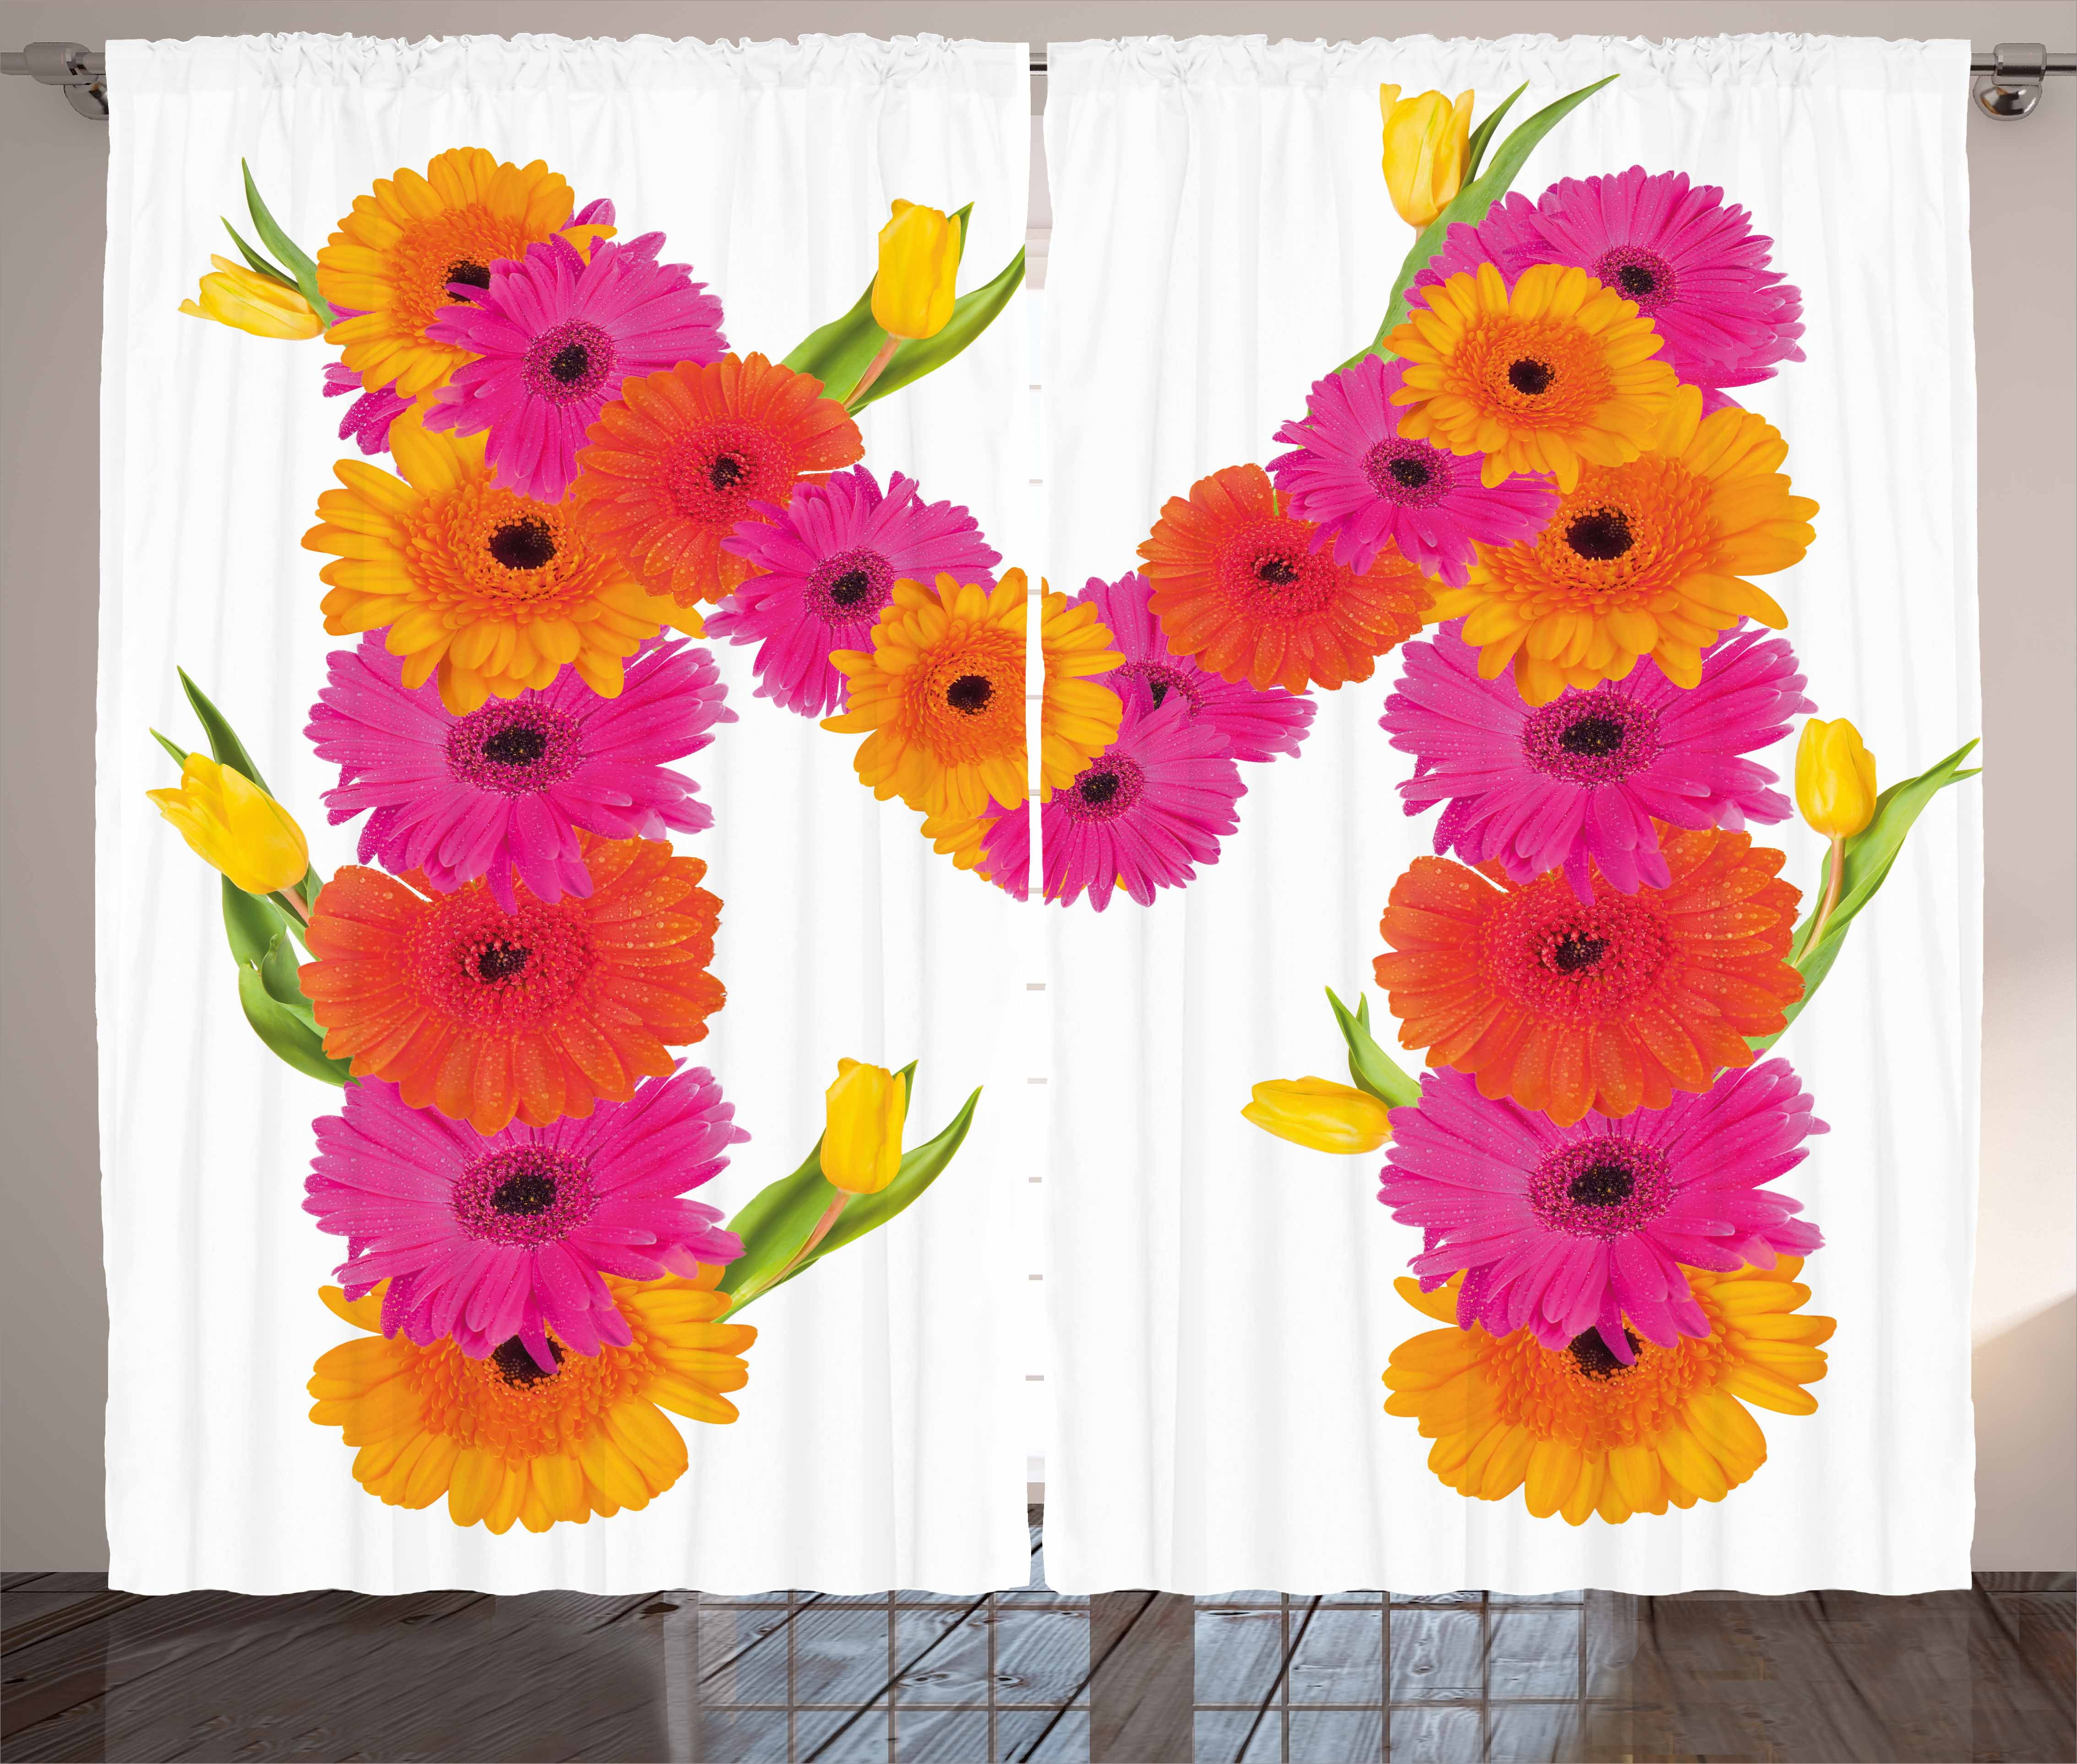 Letter M Curtains 2 Panels Set Pink And Orange Gerbera Flowers And Tulips In Full Blossom Fresh Spring Window Drapes For Living Room Bedroom 108w X